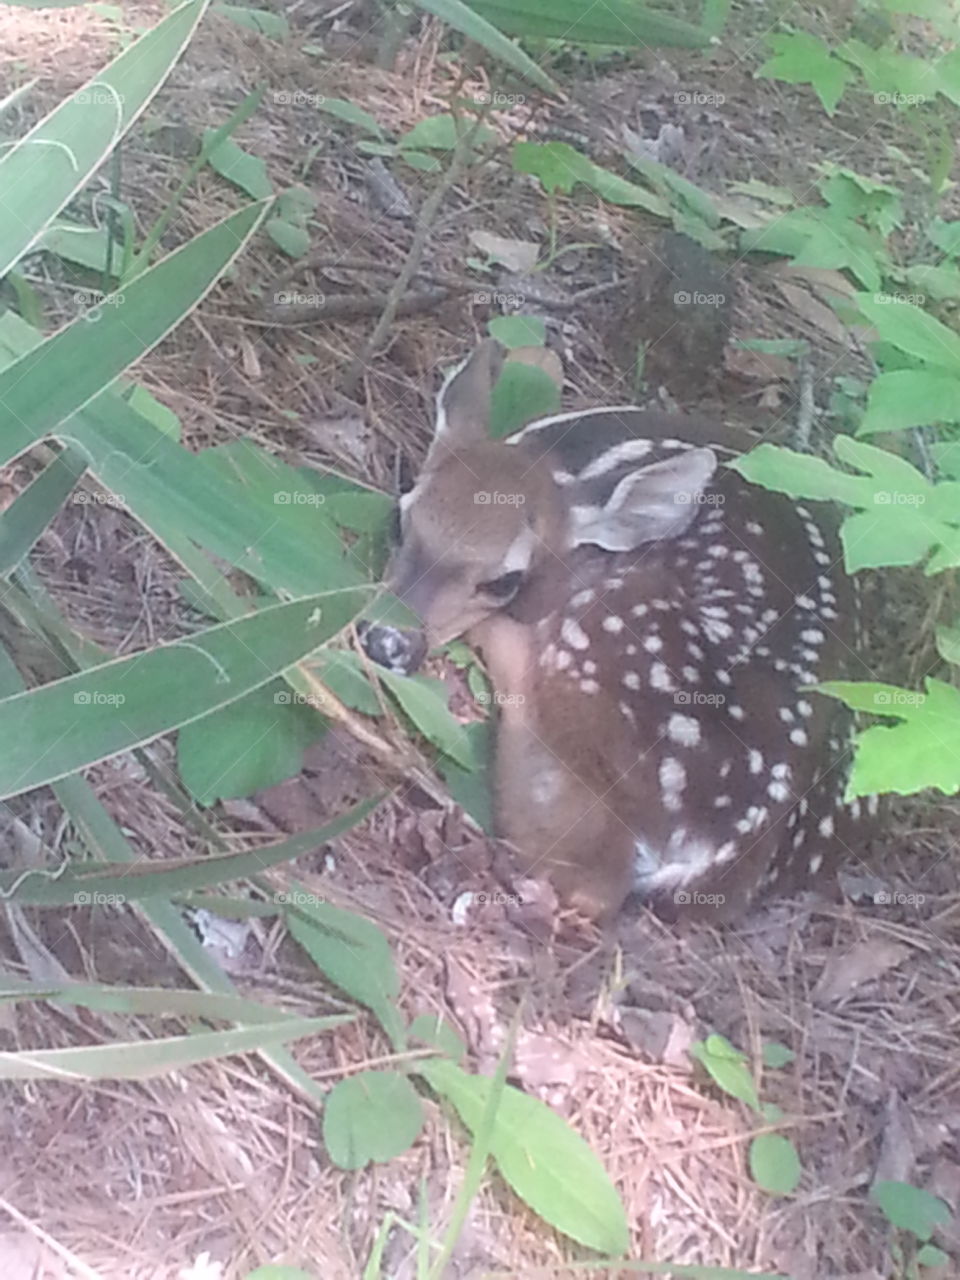 Fawn cuddled up